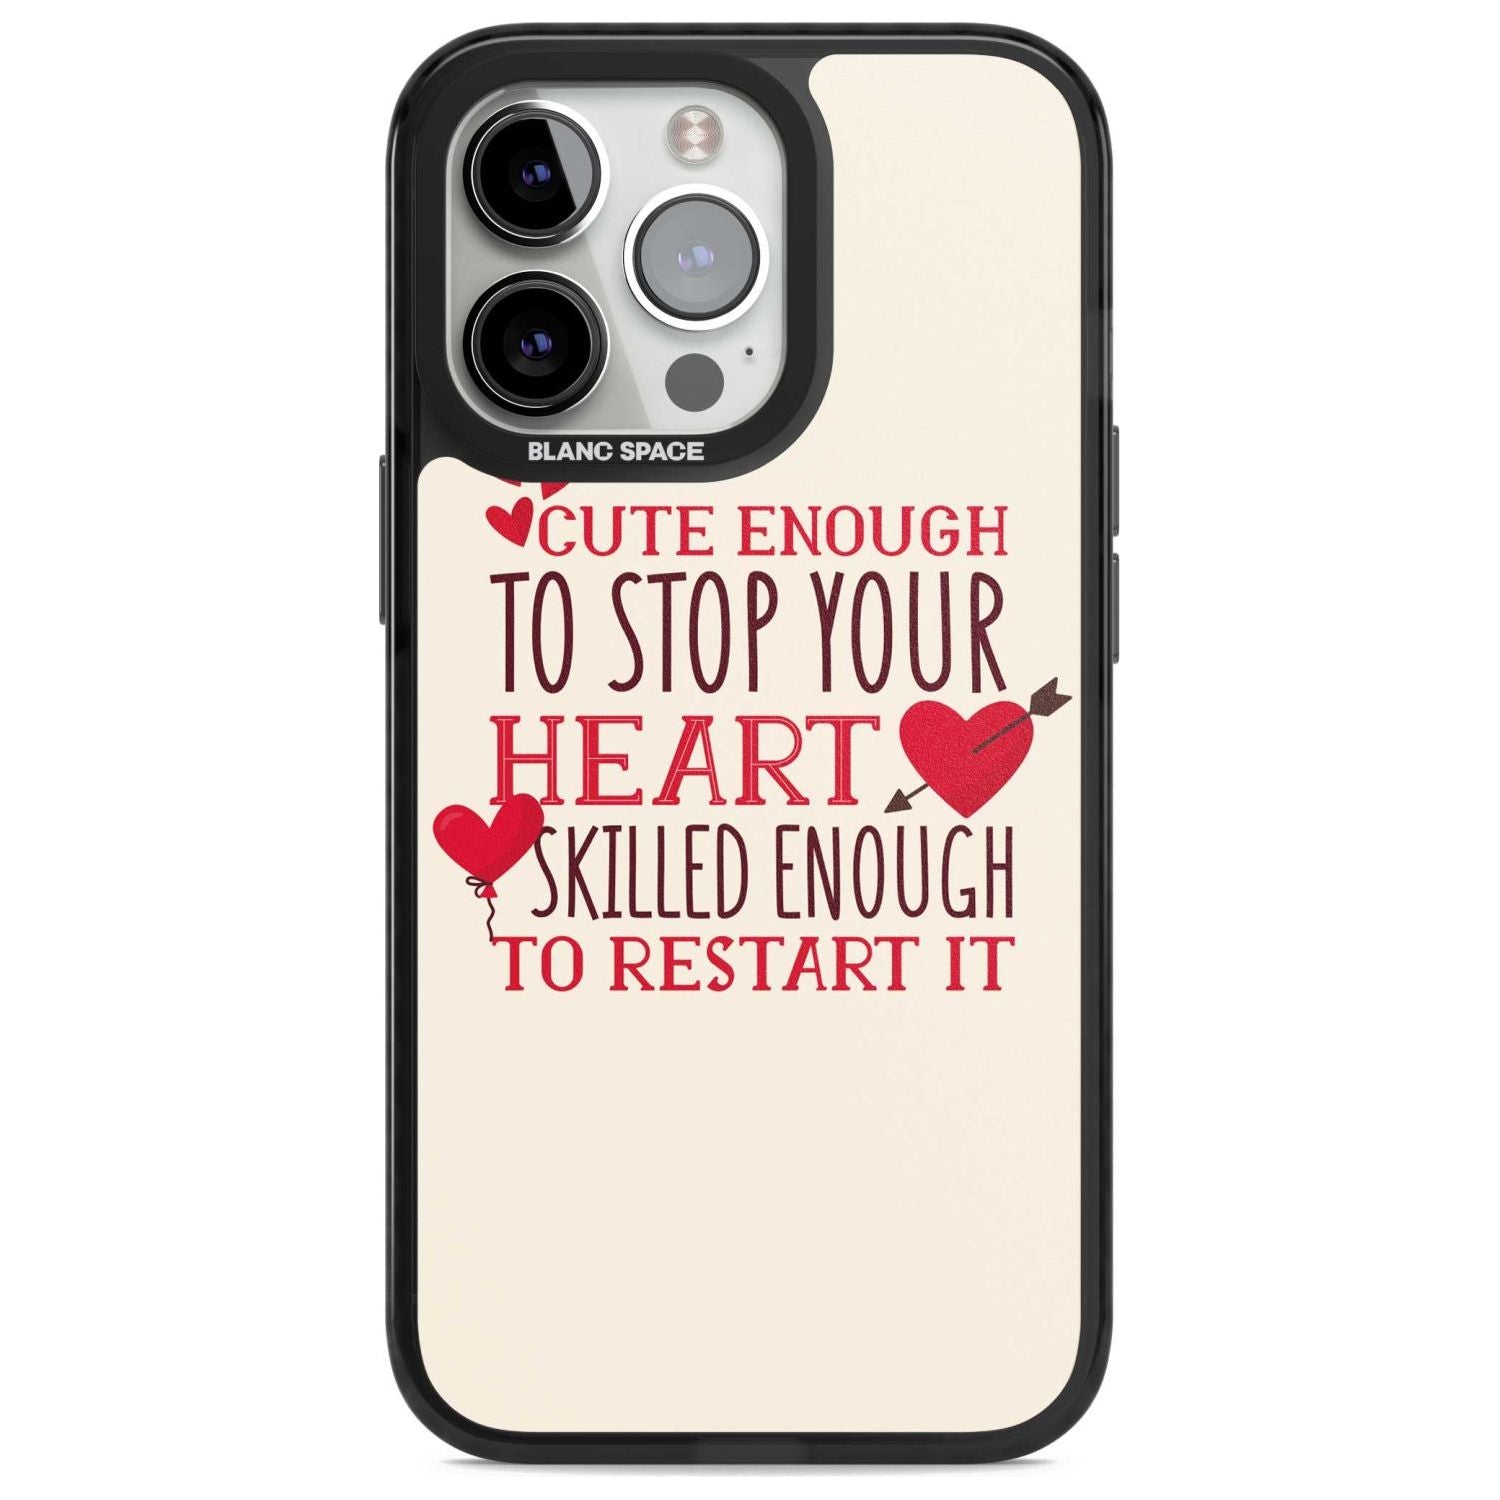 Medical Design Cute Enough to Stop Your Heart Phone Case iPhone 15 Pro Max / Magsafe Black Impact Case,iPhone 15 Pro / Magsafe Black Impact Case,iPhone 14 Pro Max / Magsafe Black Impact Case,iPhone 14 Pro / Magsafe Black Impact Case,iPhone 13 Pro / Magsafe Black Impact Case Blanc Space